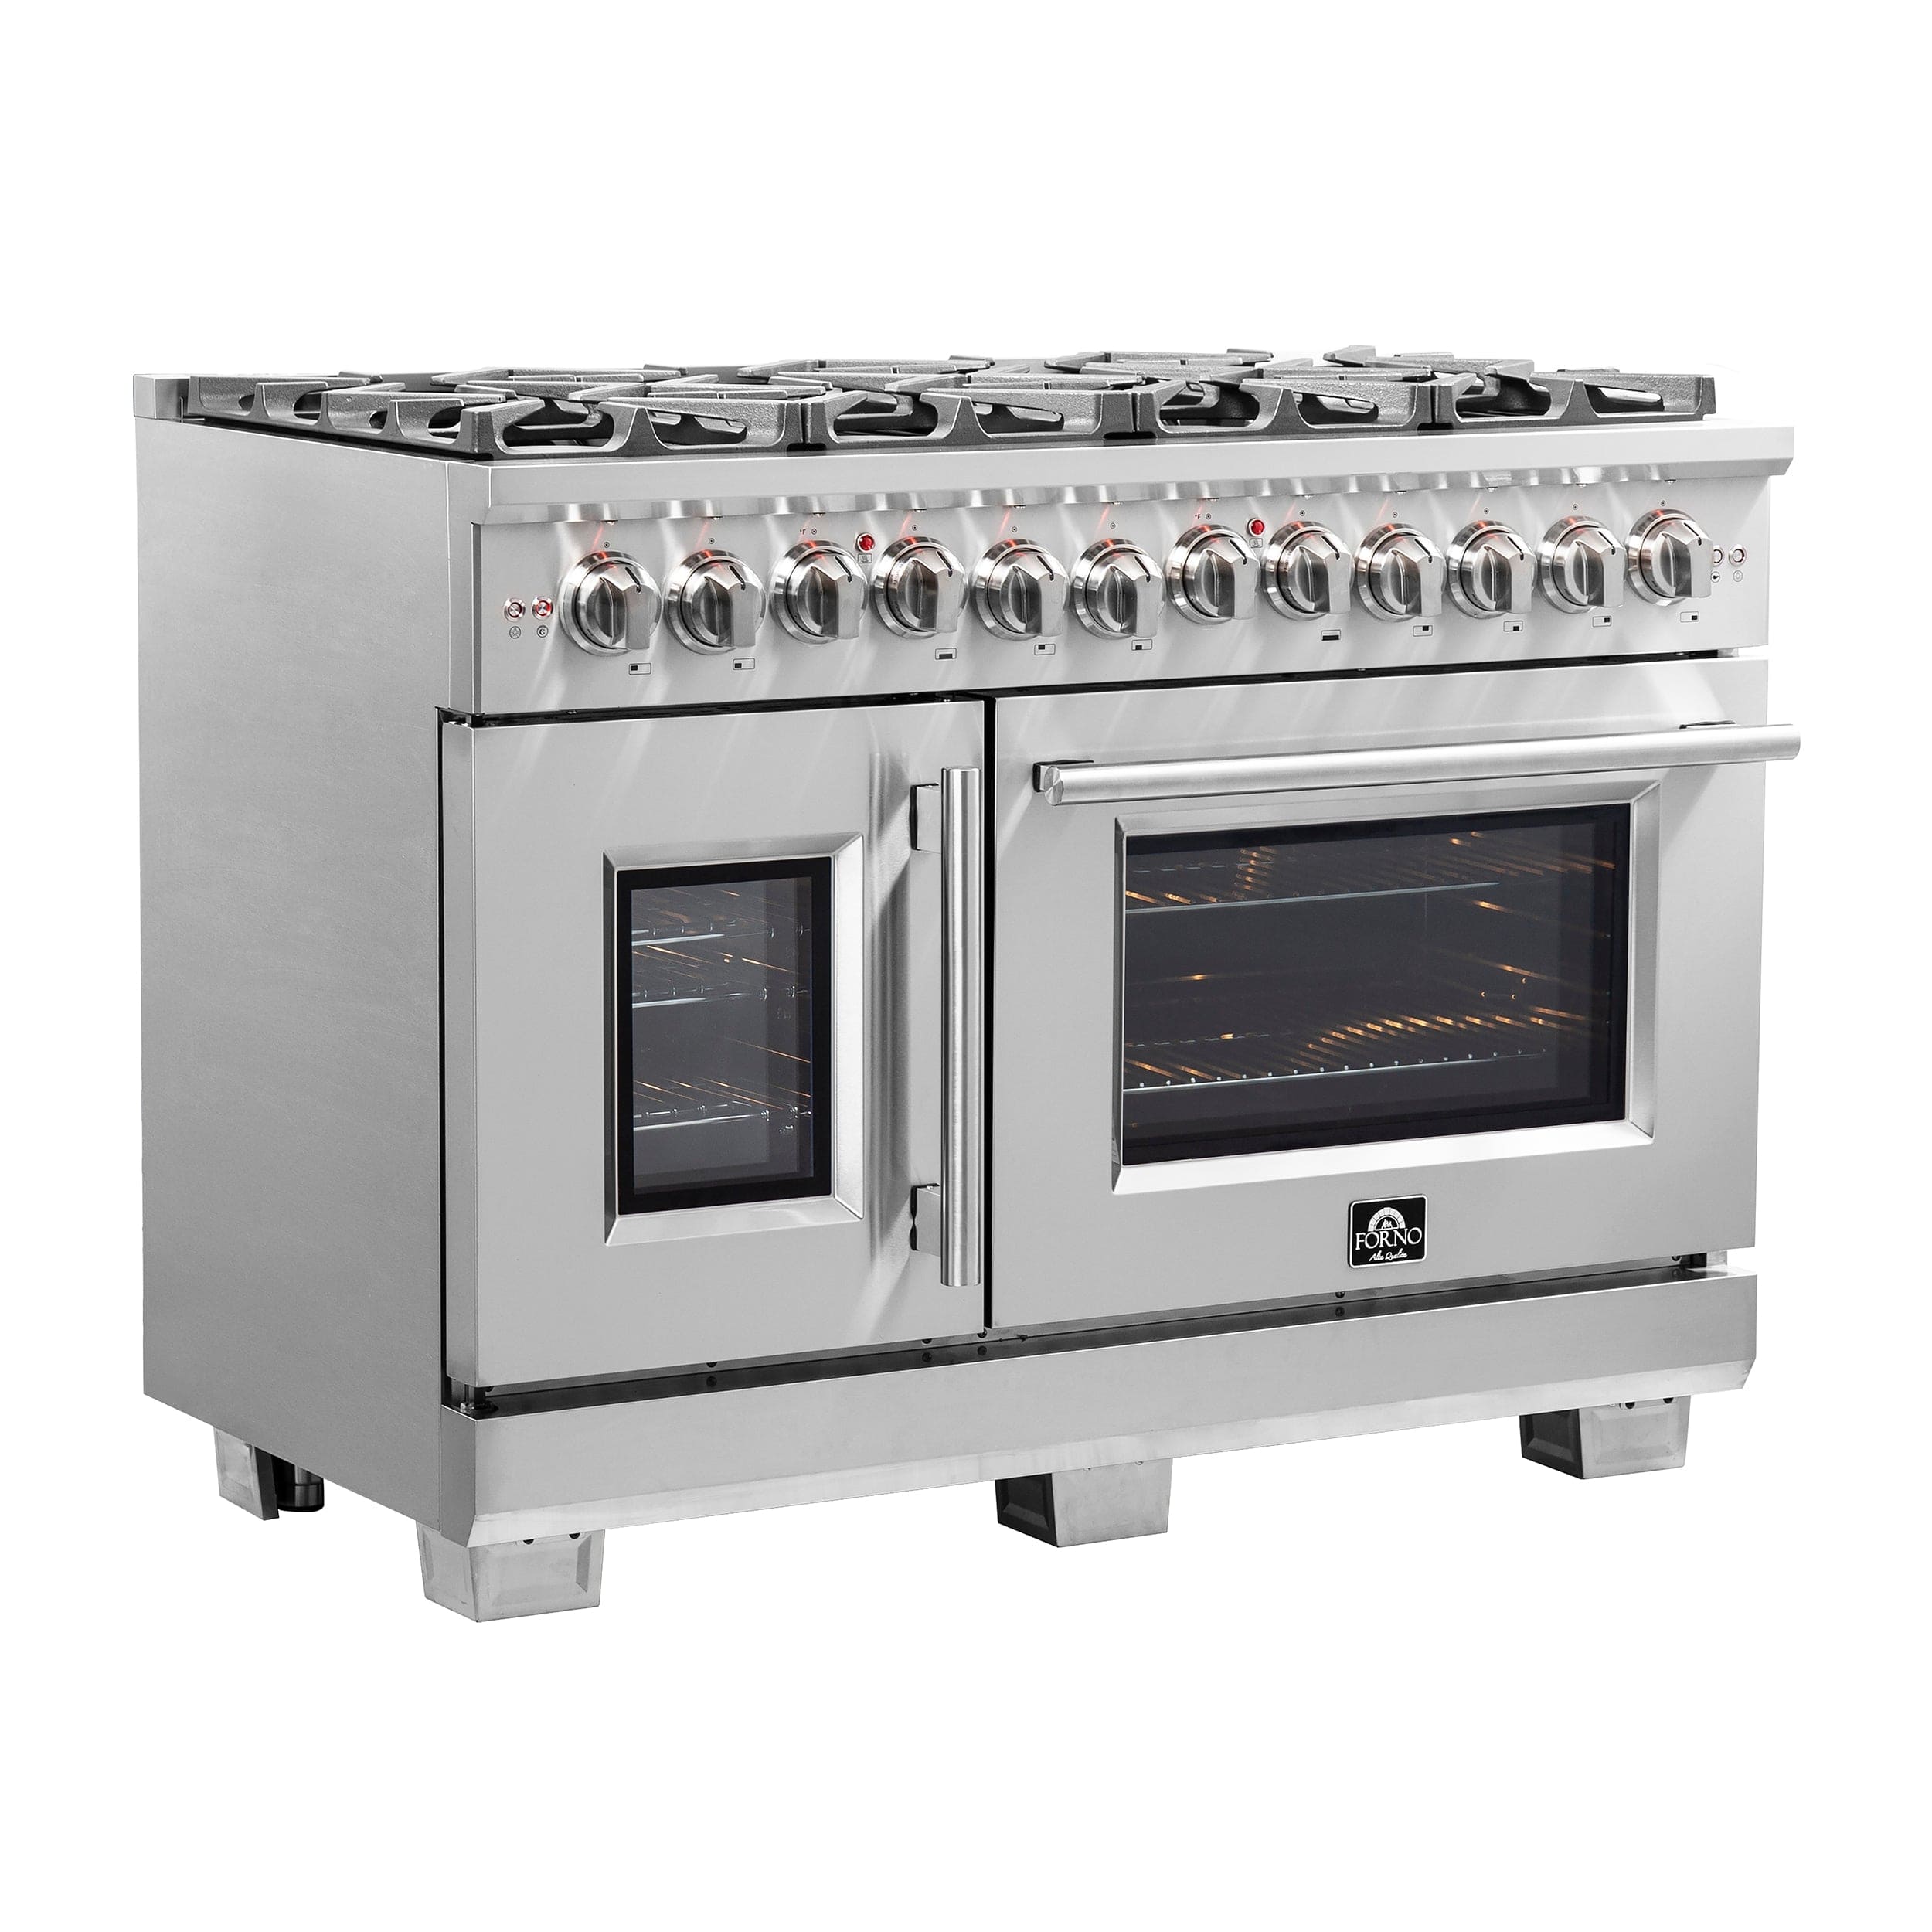 Forno Capriasca 48" Professional Gas Burner, Electric Oven Range With French Door And 8 Sealed Burners, FFSGS6387-48 Ranges FFSGS6387-48 Luxury Appliances Direct